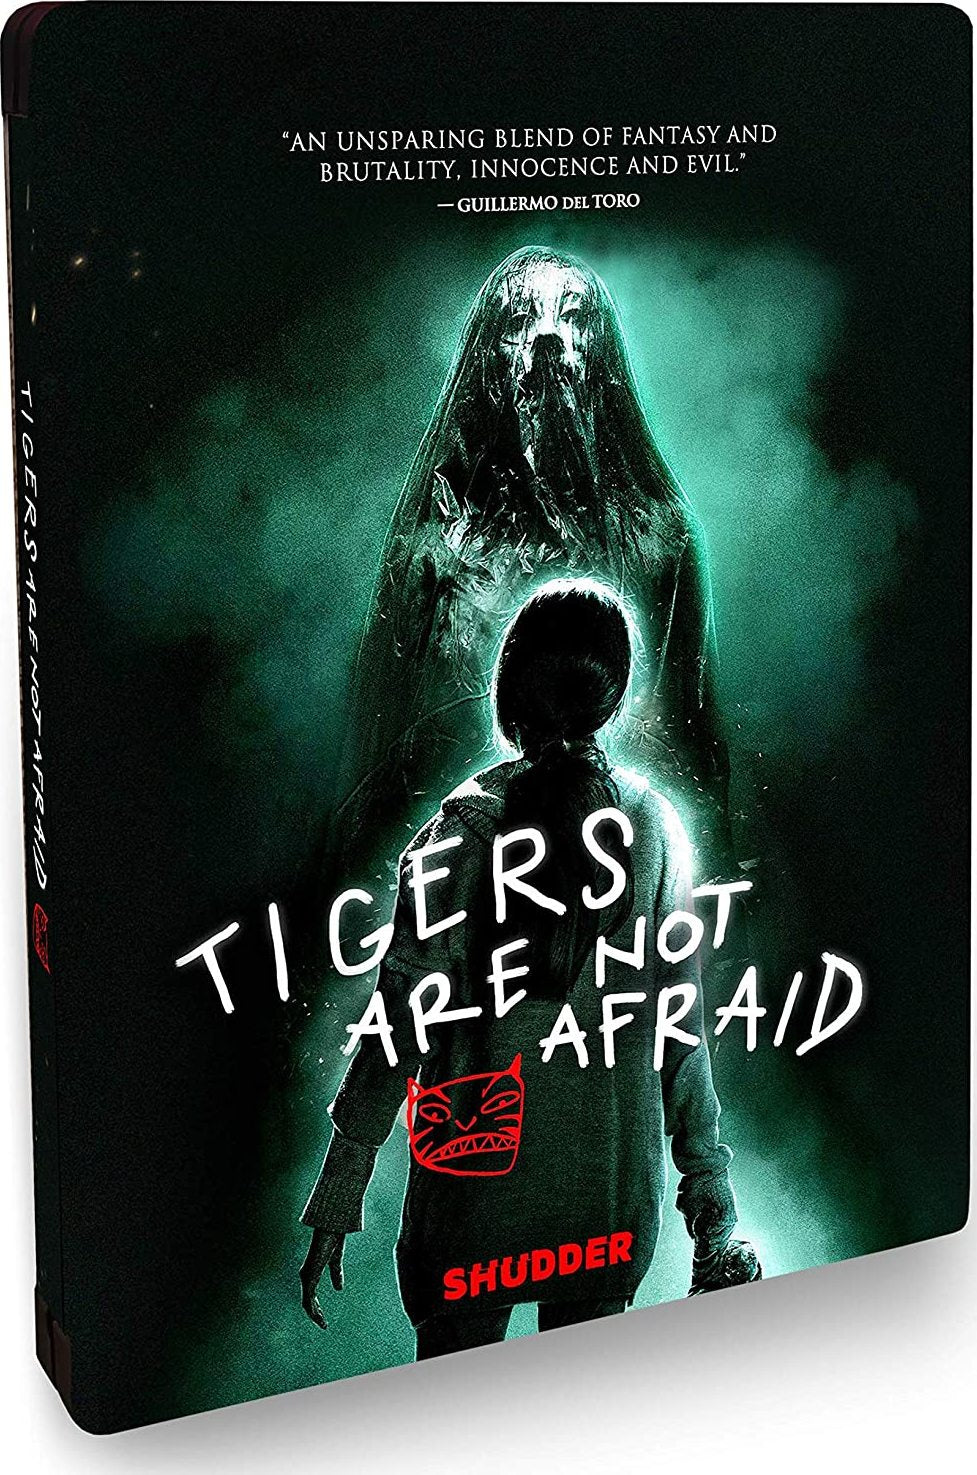 TIGERS ARE NOT AFRAID (LIMITED EDITION) BLU-RAY/DVD STEELBOOK